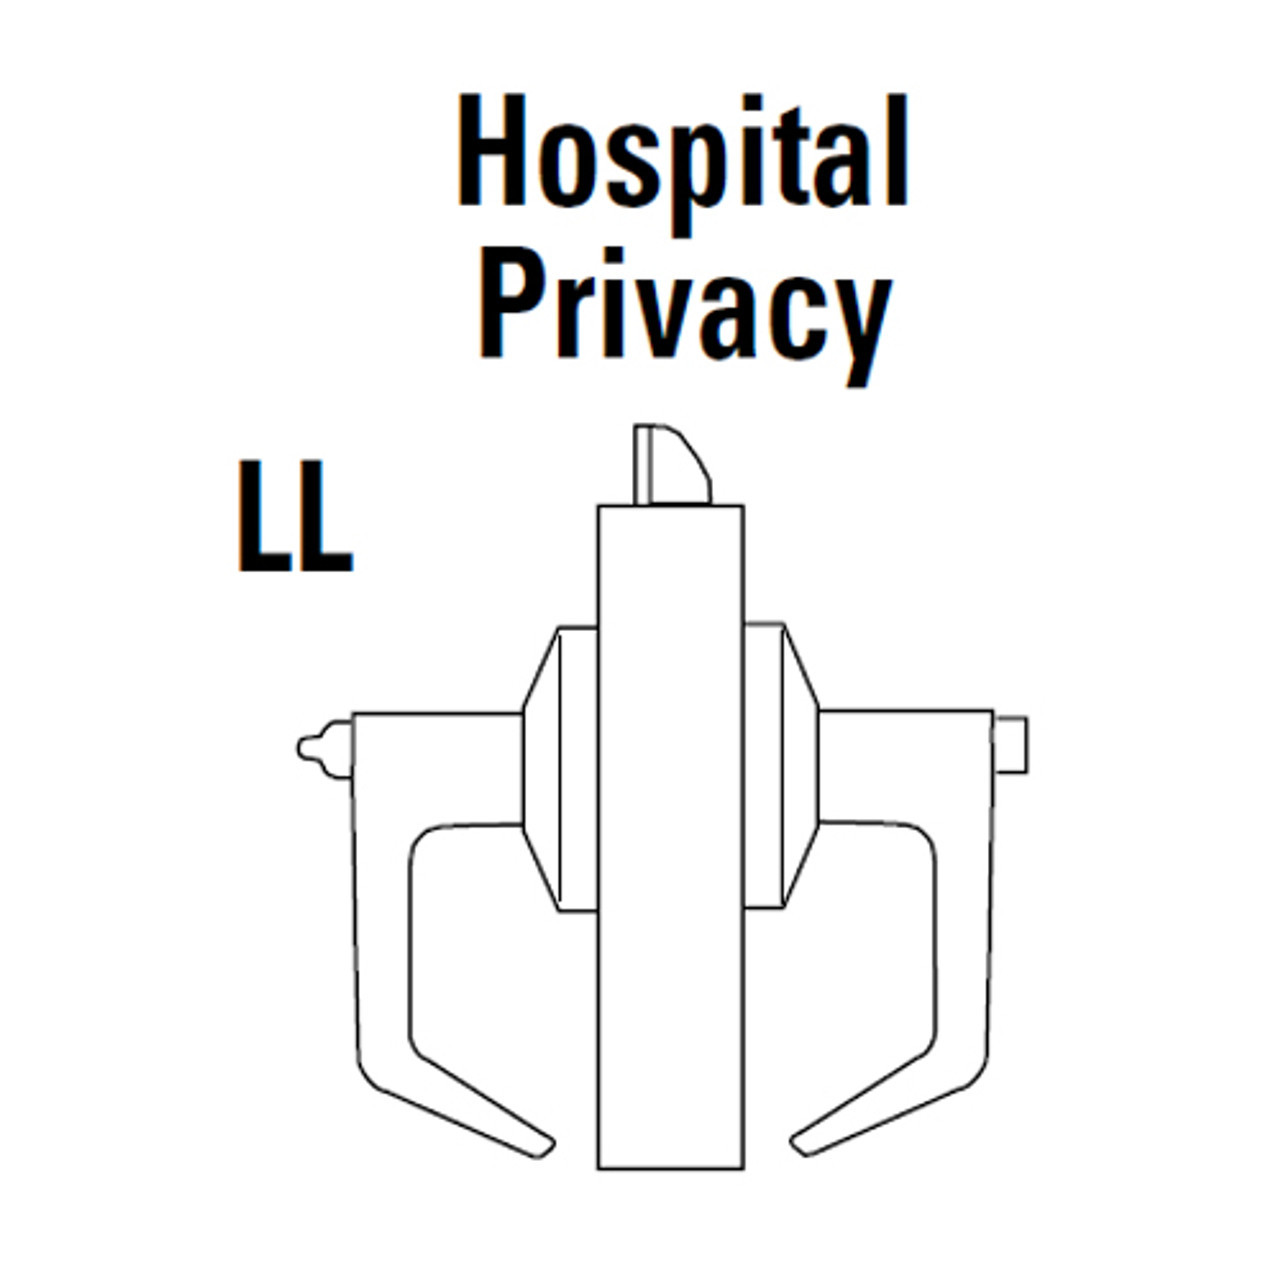 9K30LL16KSTK618LM Best 9K Series Hospital Privacy Heavy Duty Cylindrical Lever Locks with Curved Without Return Lever Design in Bright Nickel